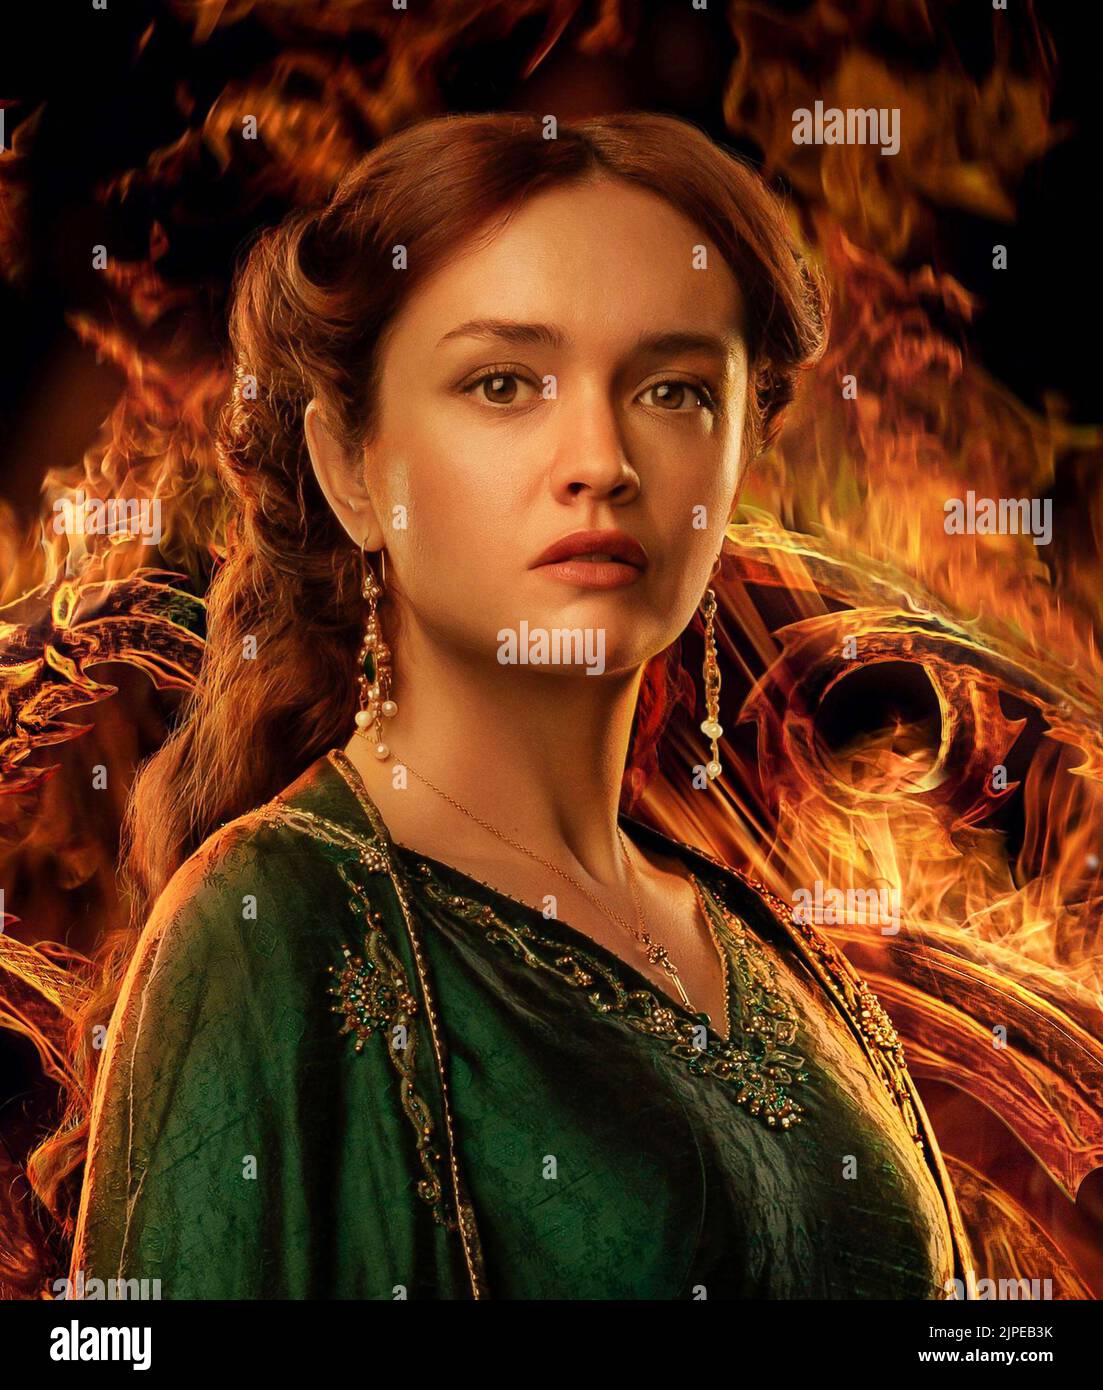 USA. Olivia Cooke in the (C)HBO new series: House of the Dragon (2022).  Plot: The story of the House Targaryen set 300 years before the events of Game of Thrones (2011).  Ref: LMK106-J8255-150822 Supplied by LMKMEDIA. Editorial Only. Landmark Media is not the copyright owner of these Film or TV stills but provides a service only for recognised Media outlets. pictures@lmkmedia.com Stock Photo